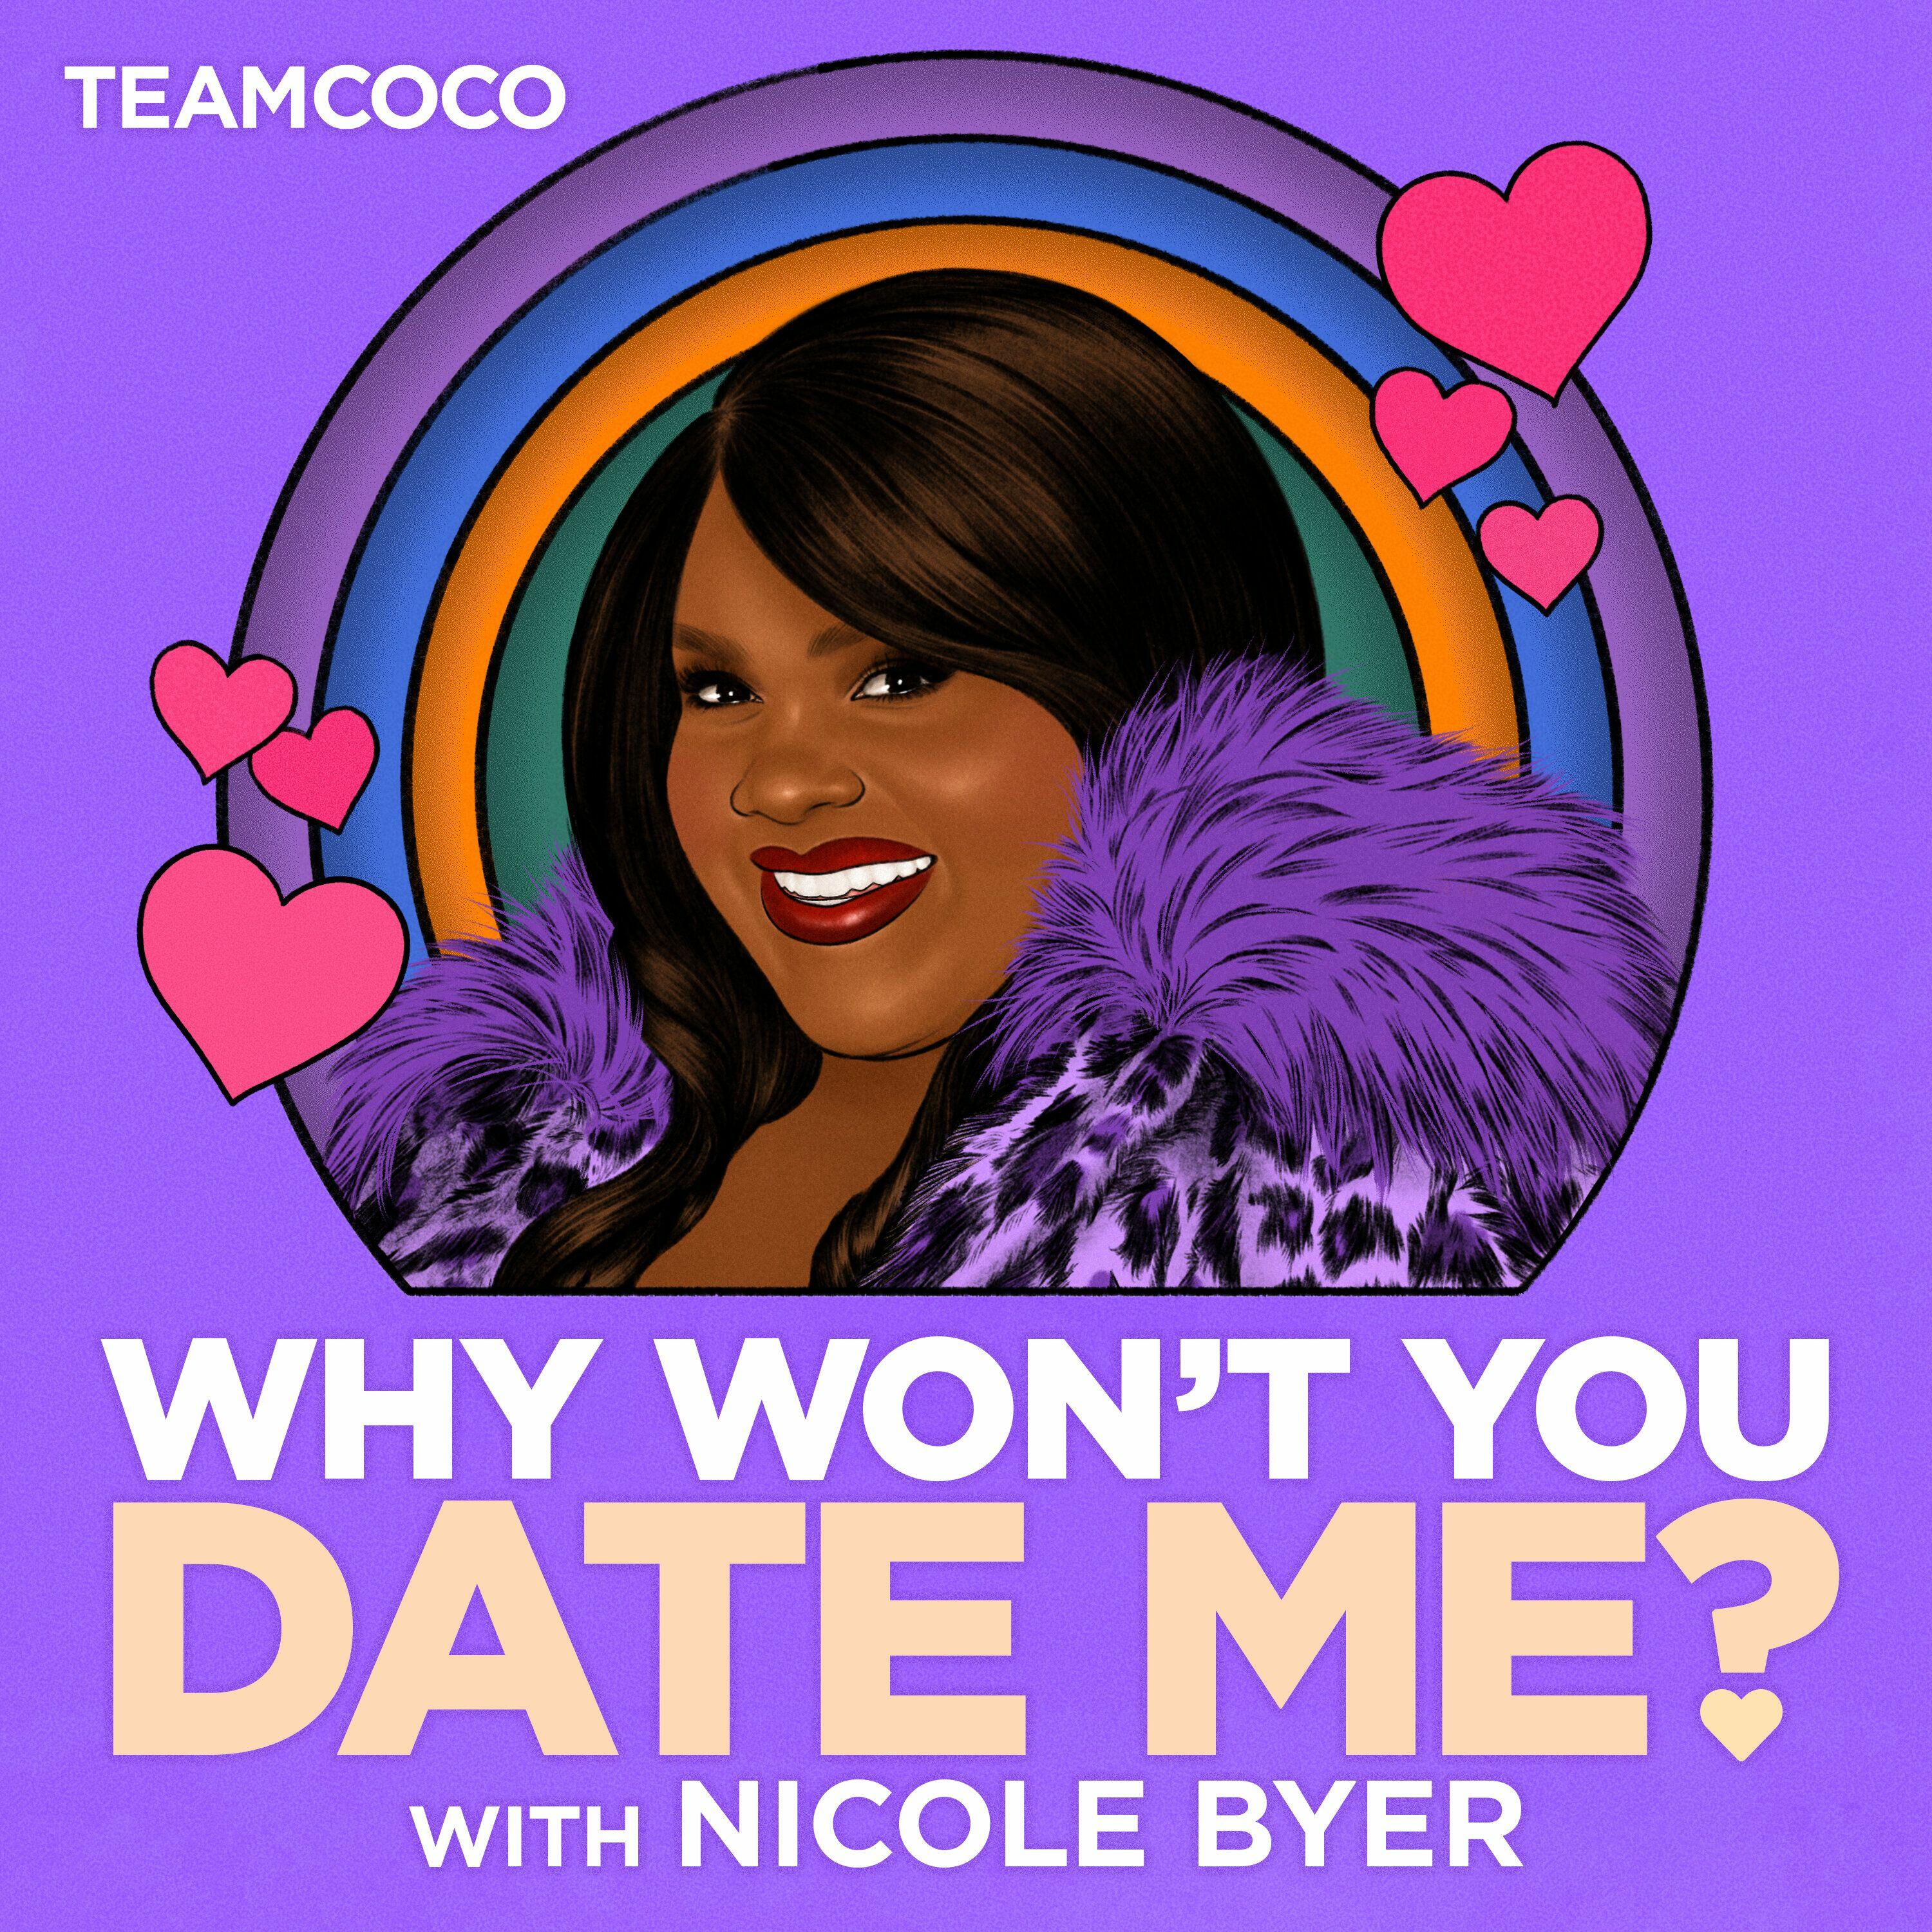 Why Wont You Date Me? with Nicole Byer iHeart